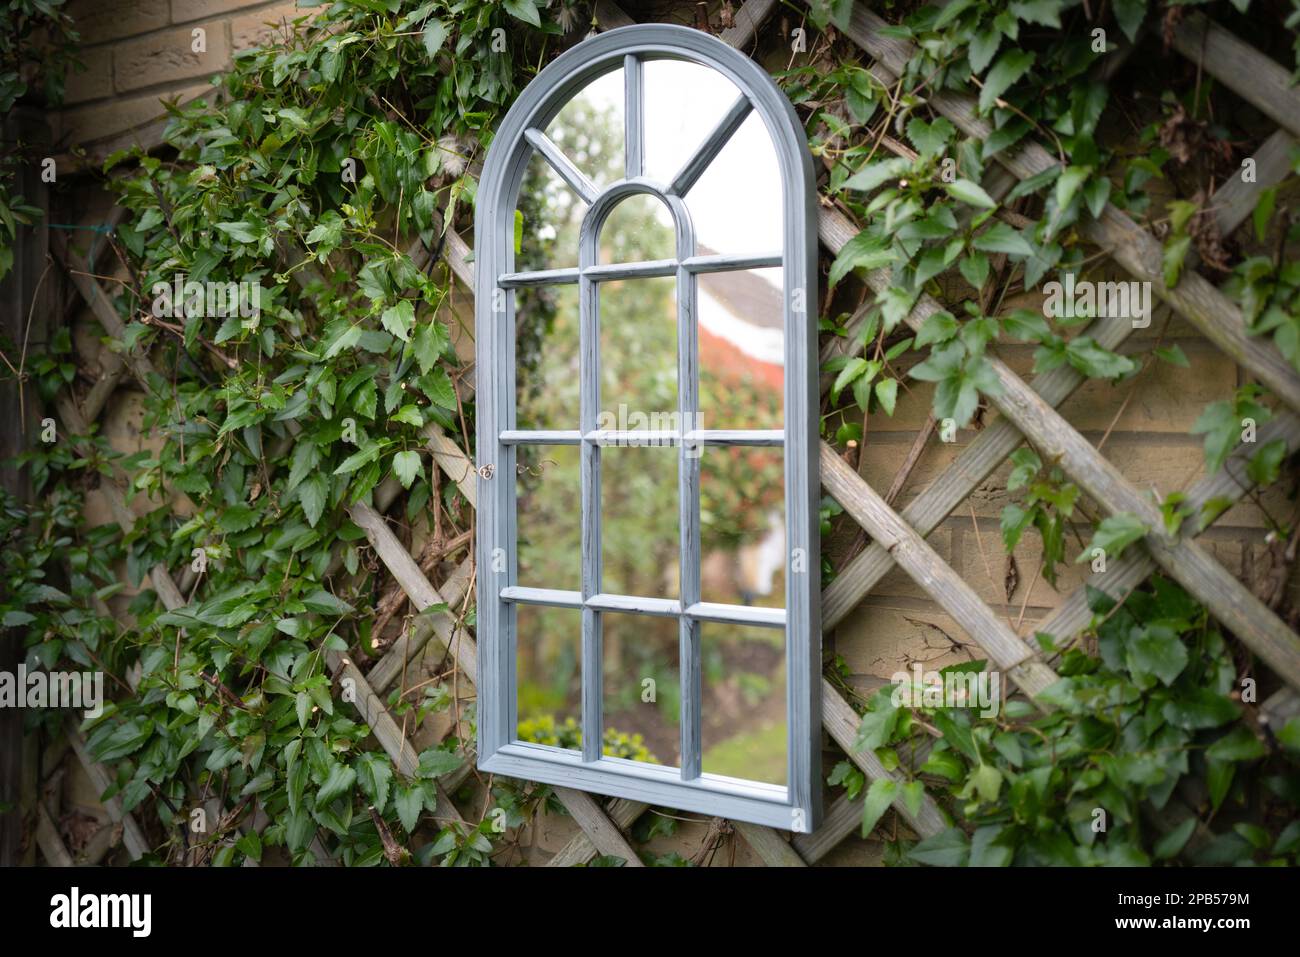 Shallow focus of a secret garden showing a ornate mirror seen attached to a trellis with vines growing around the frame. Stock Photo